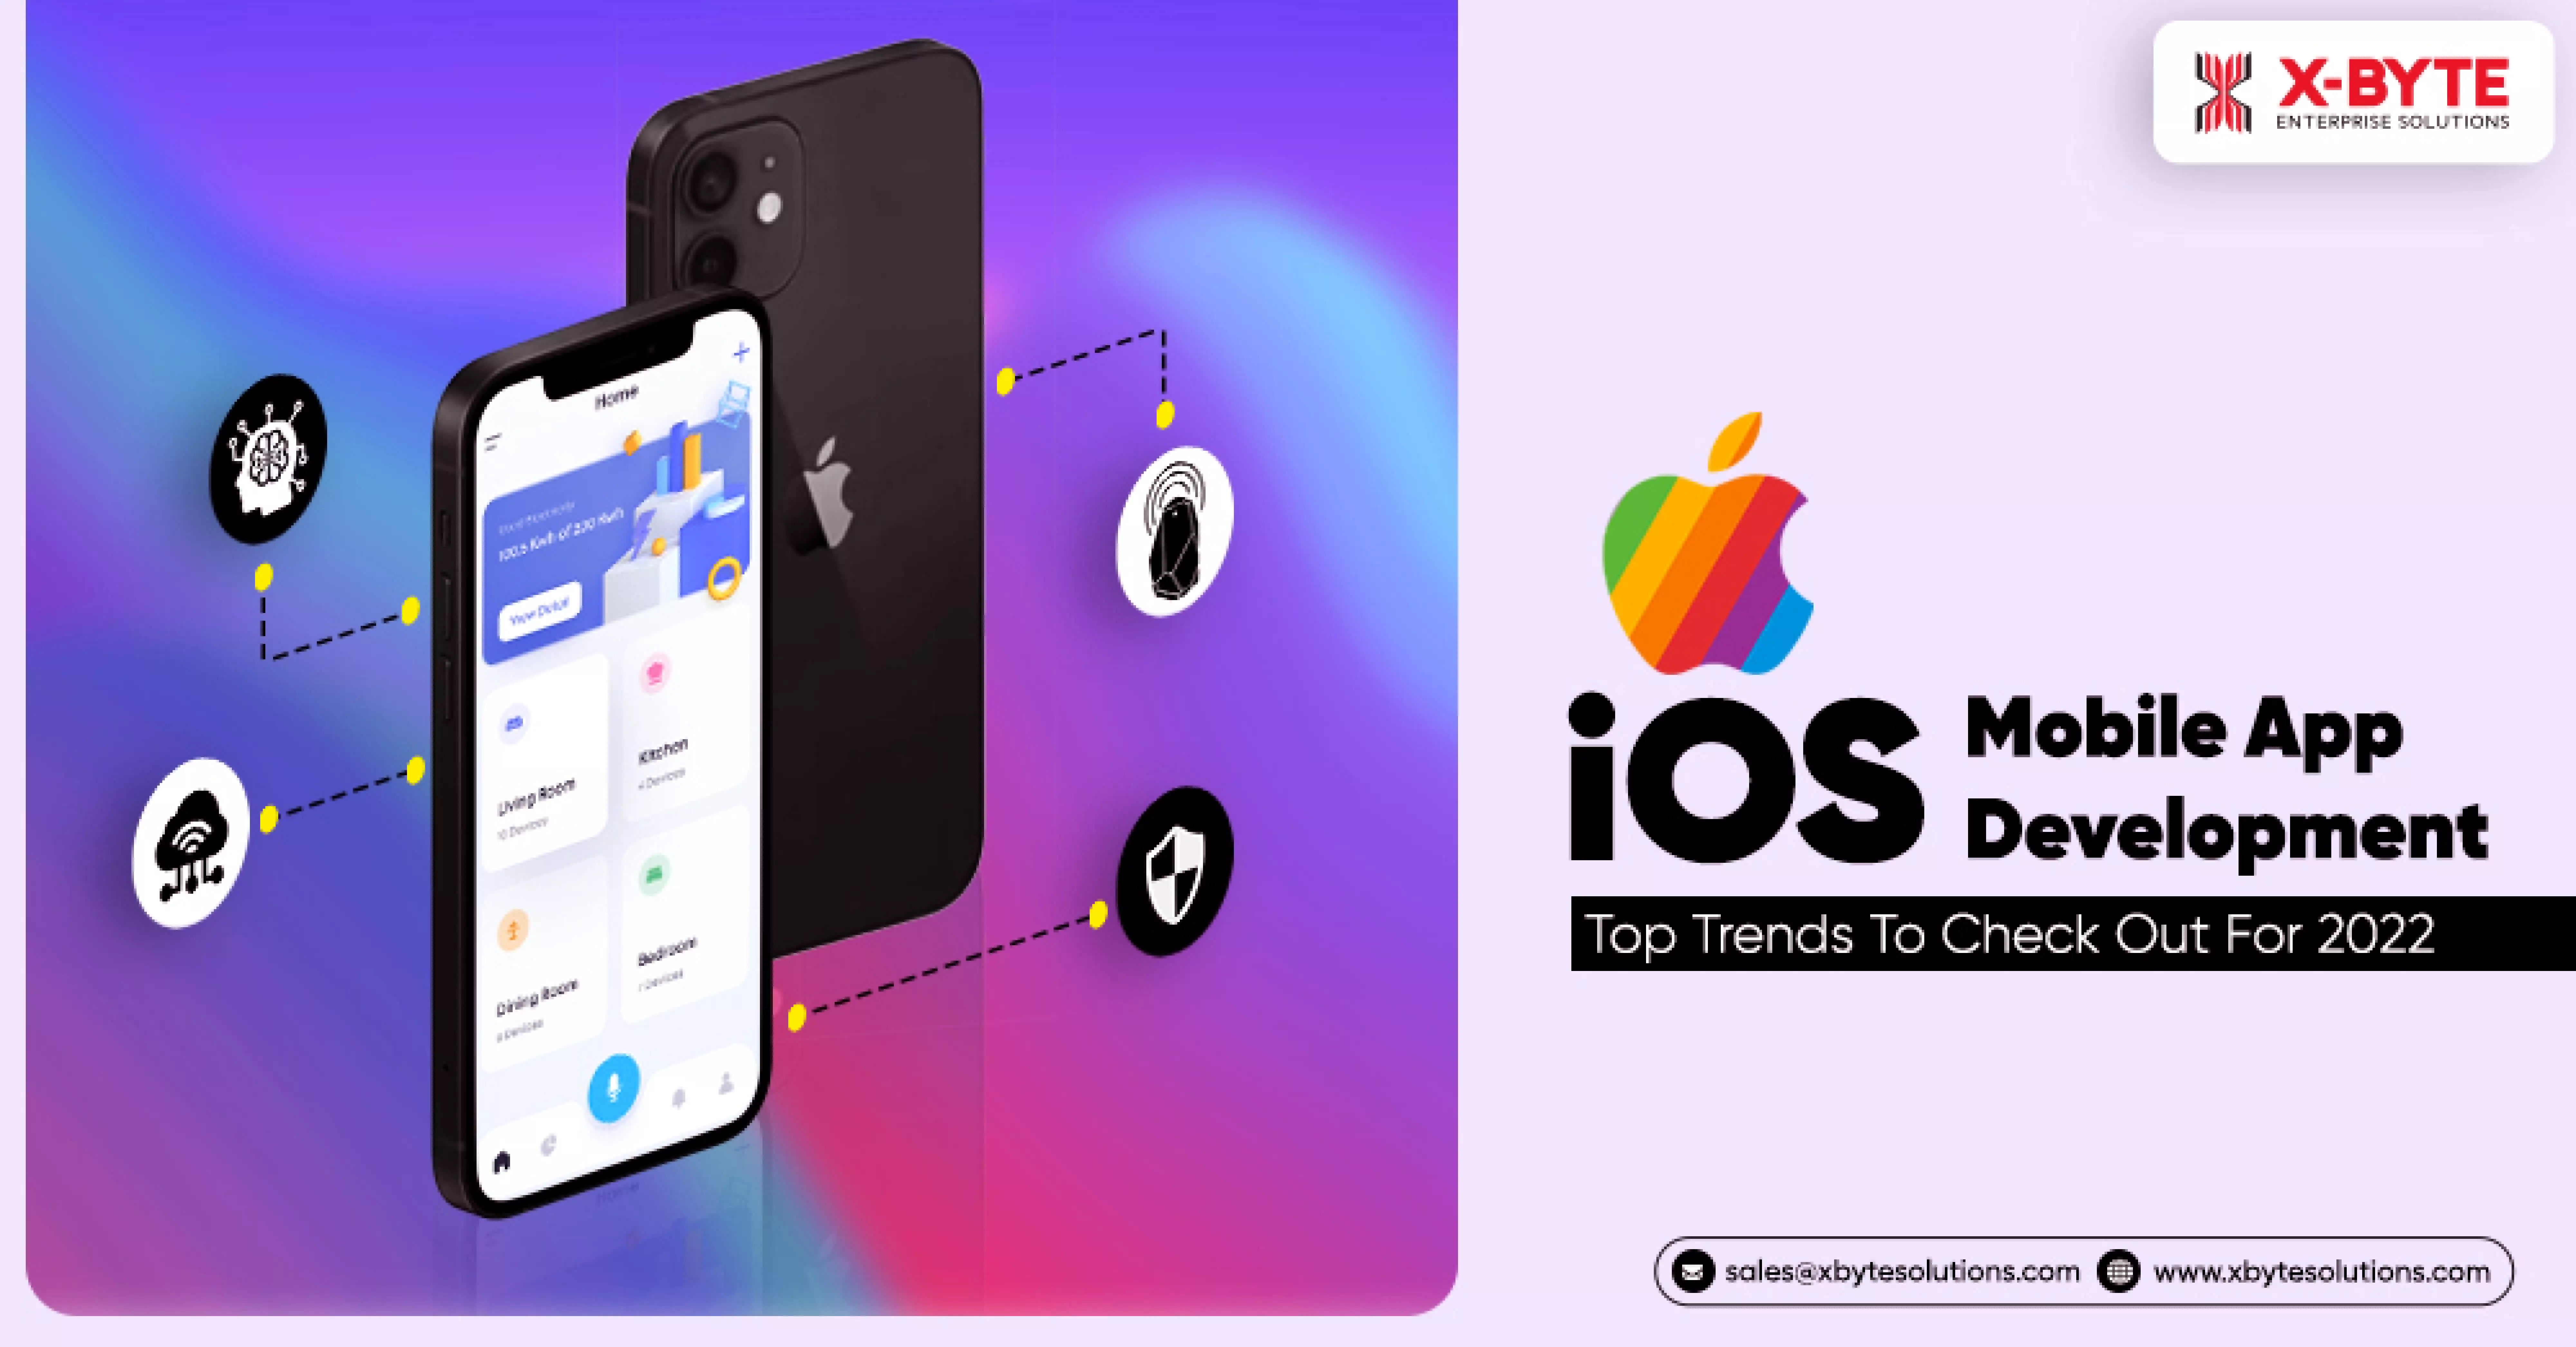 iOS Mobile App Development – Top Trends To Check Out For In 2022